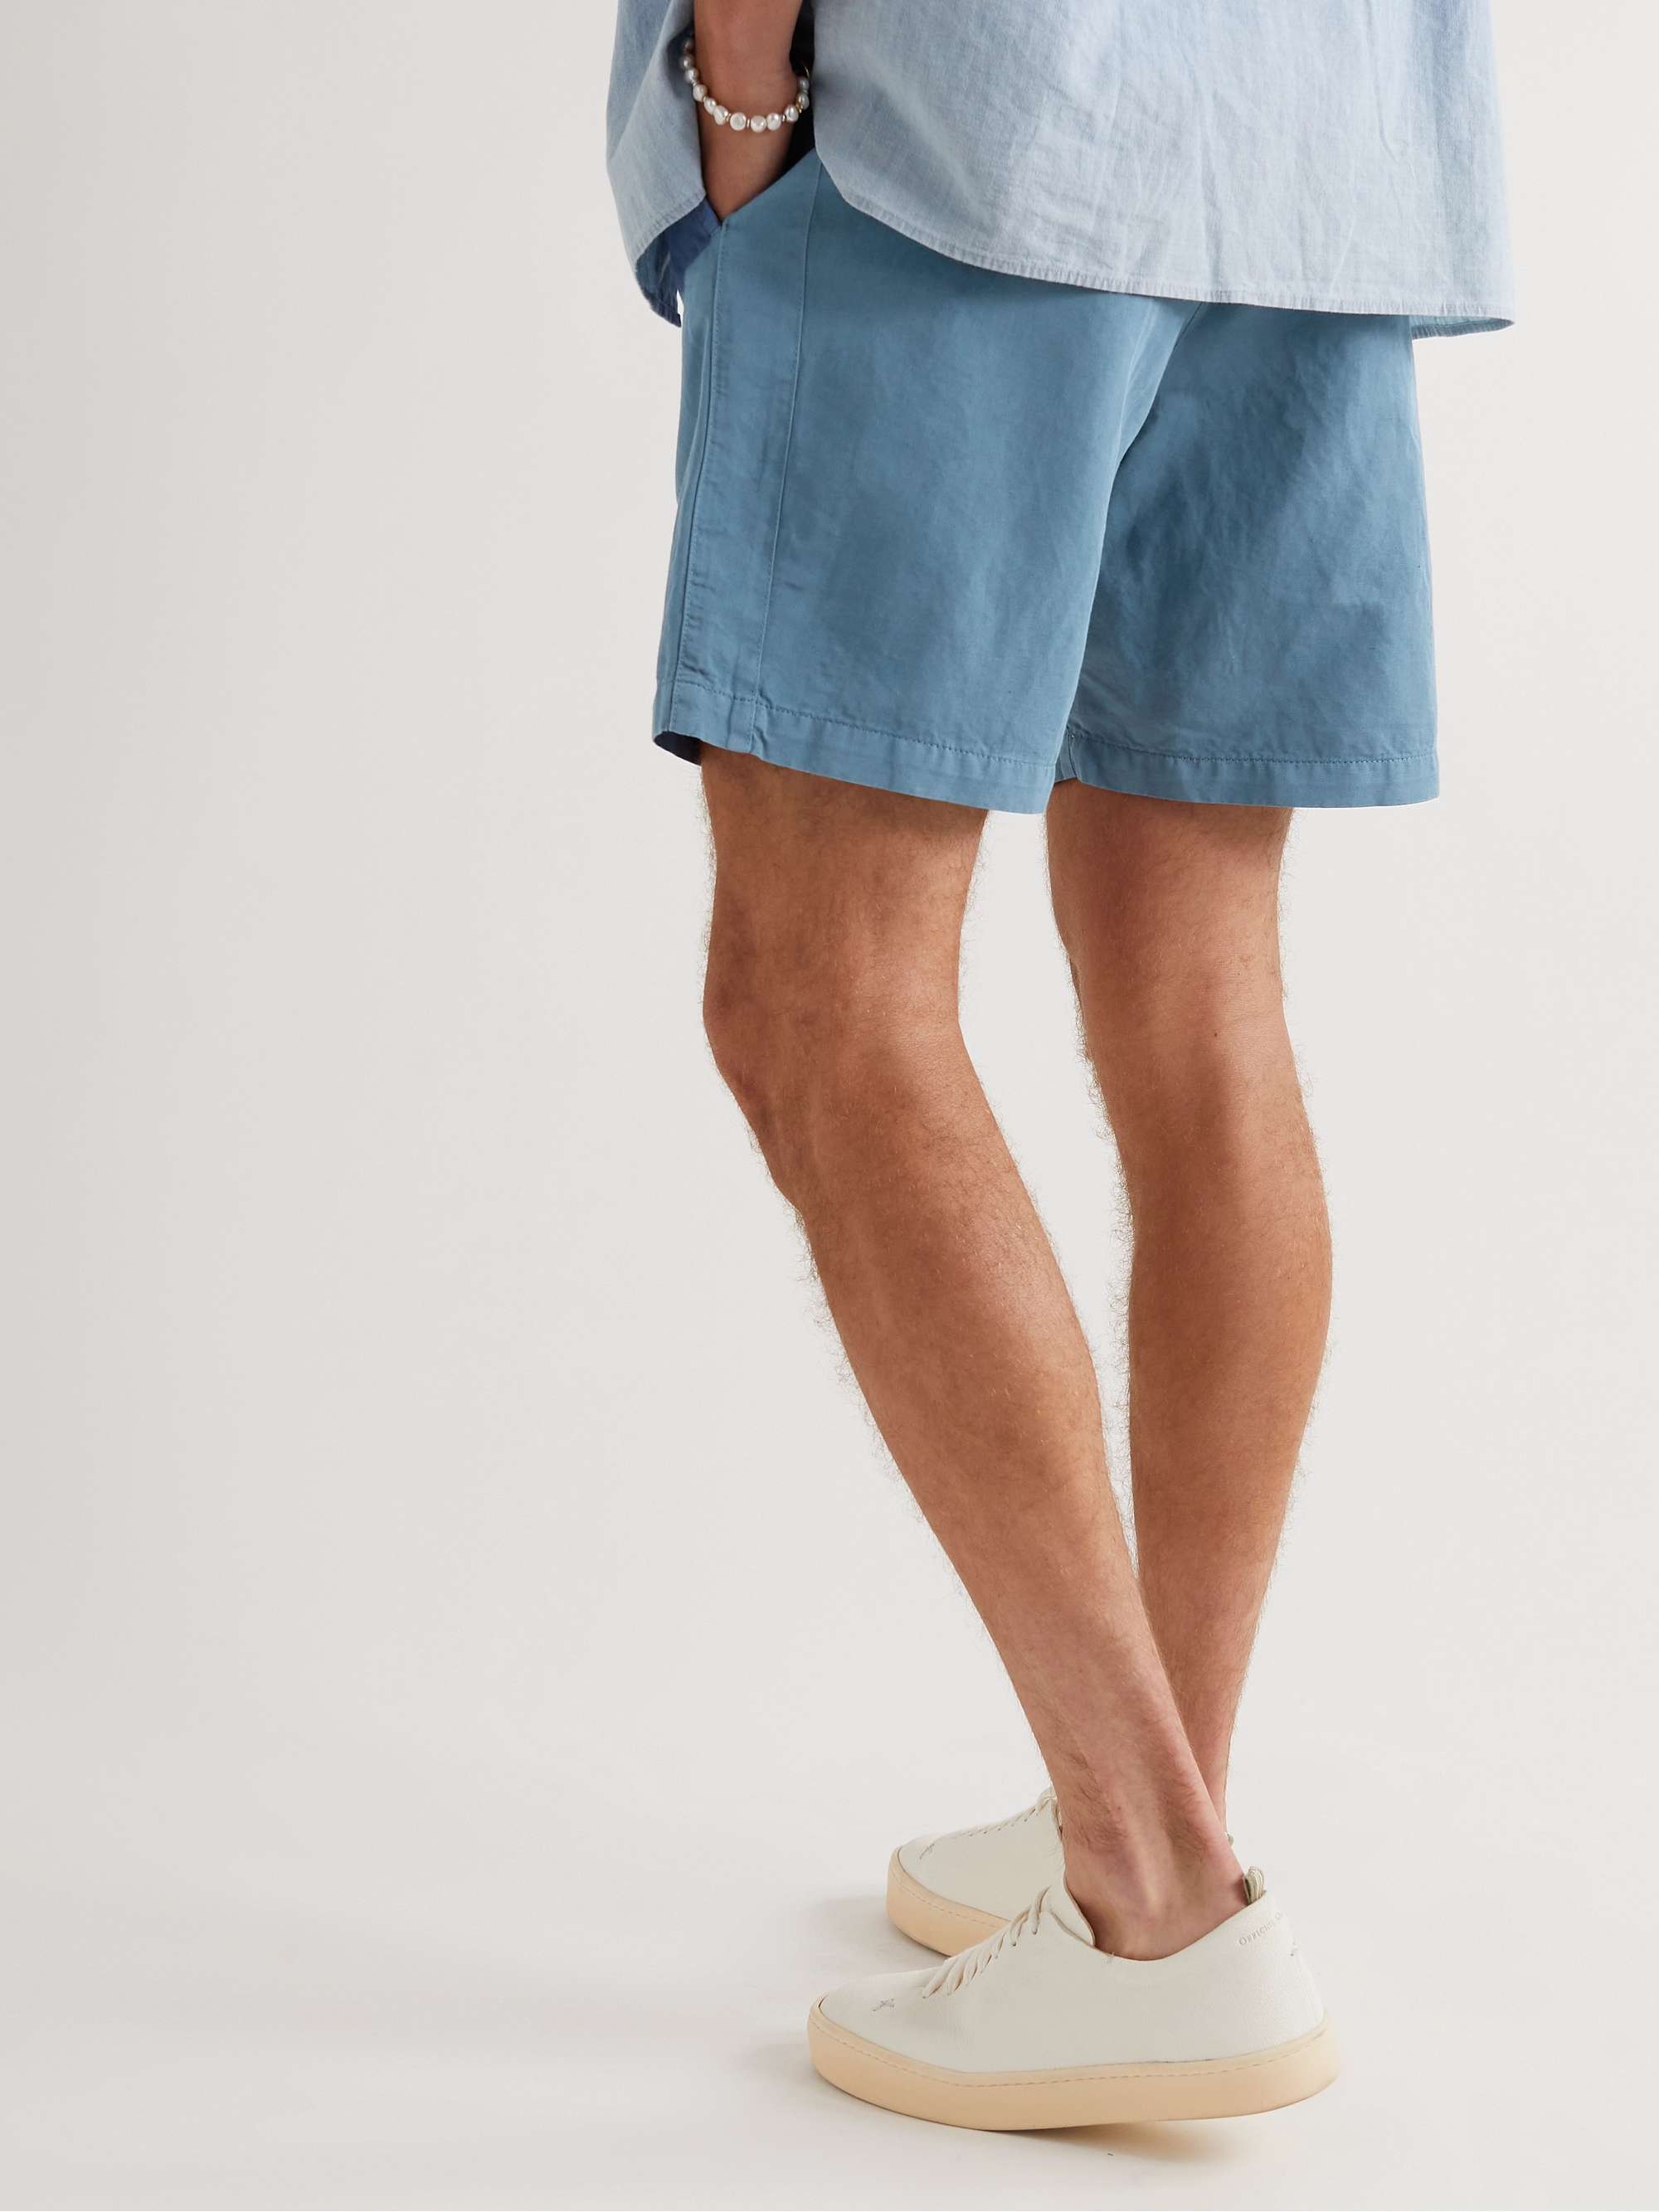 MR P. Cotton and Linen-Blend Twill Drawstring Shorts